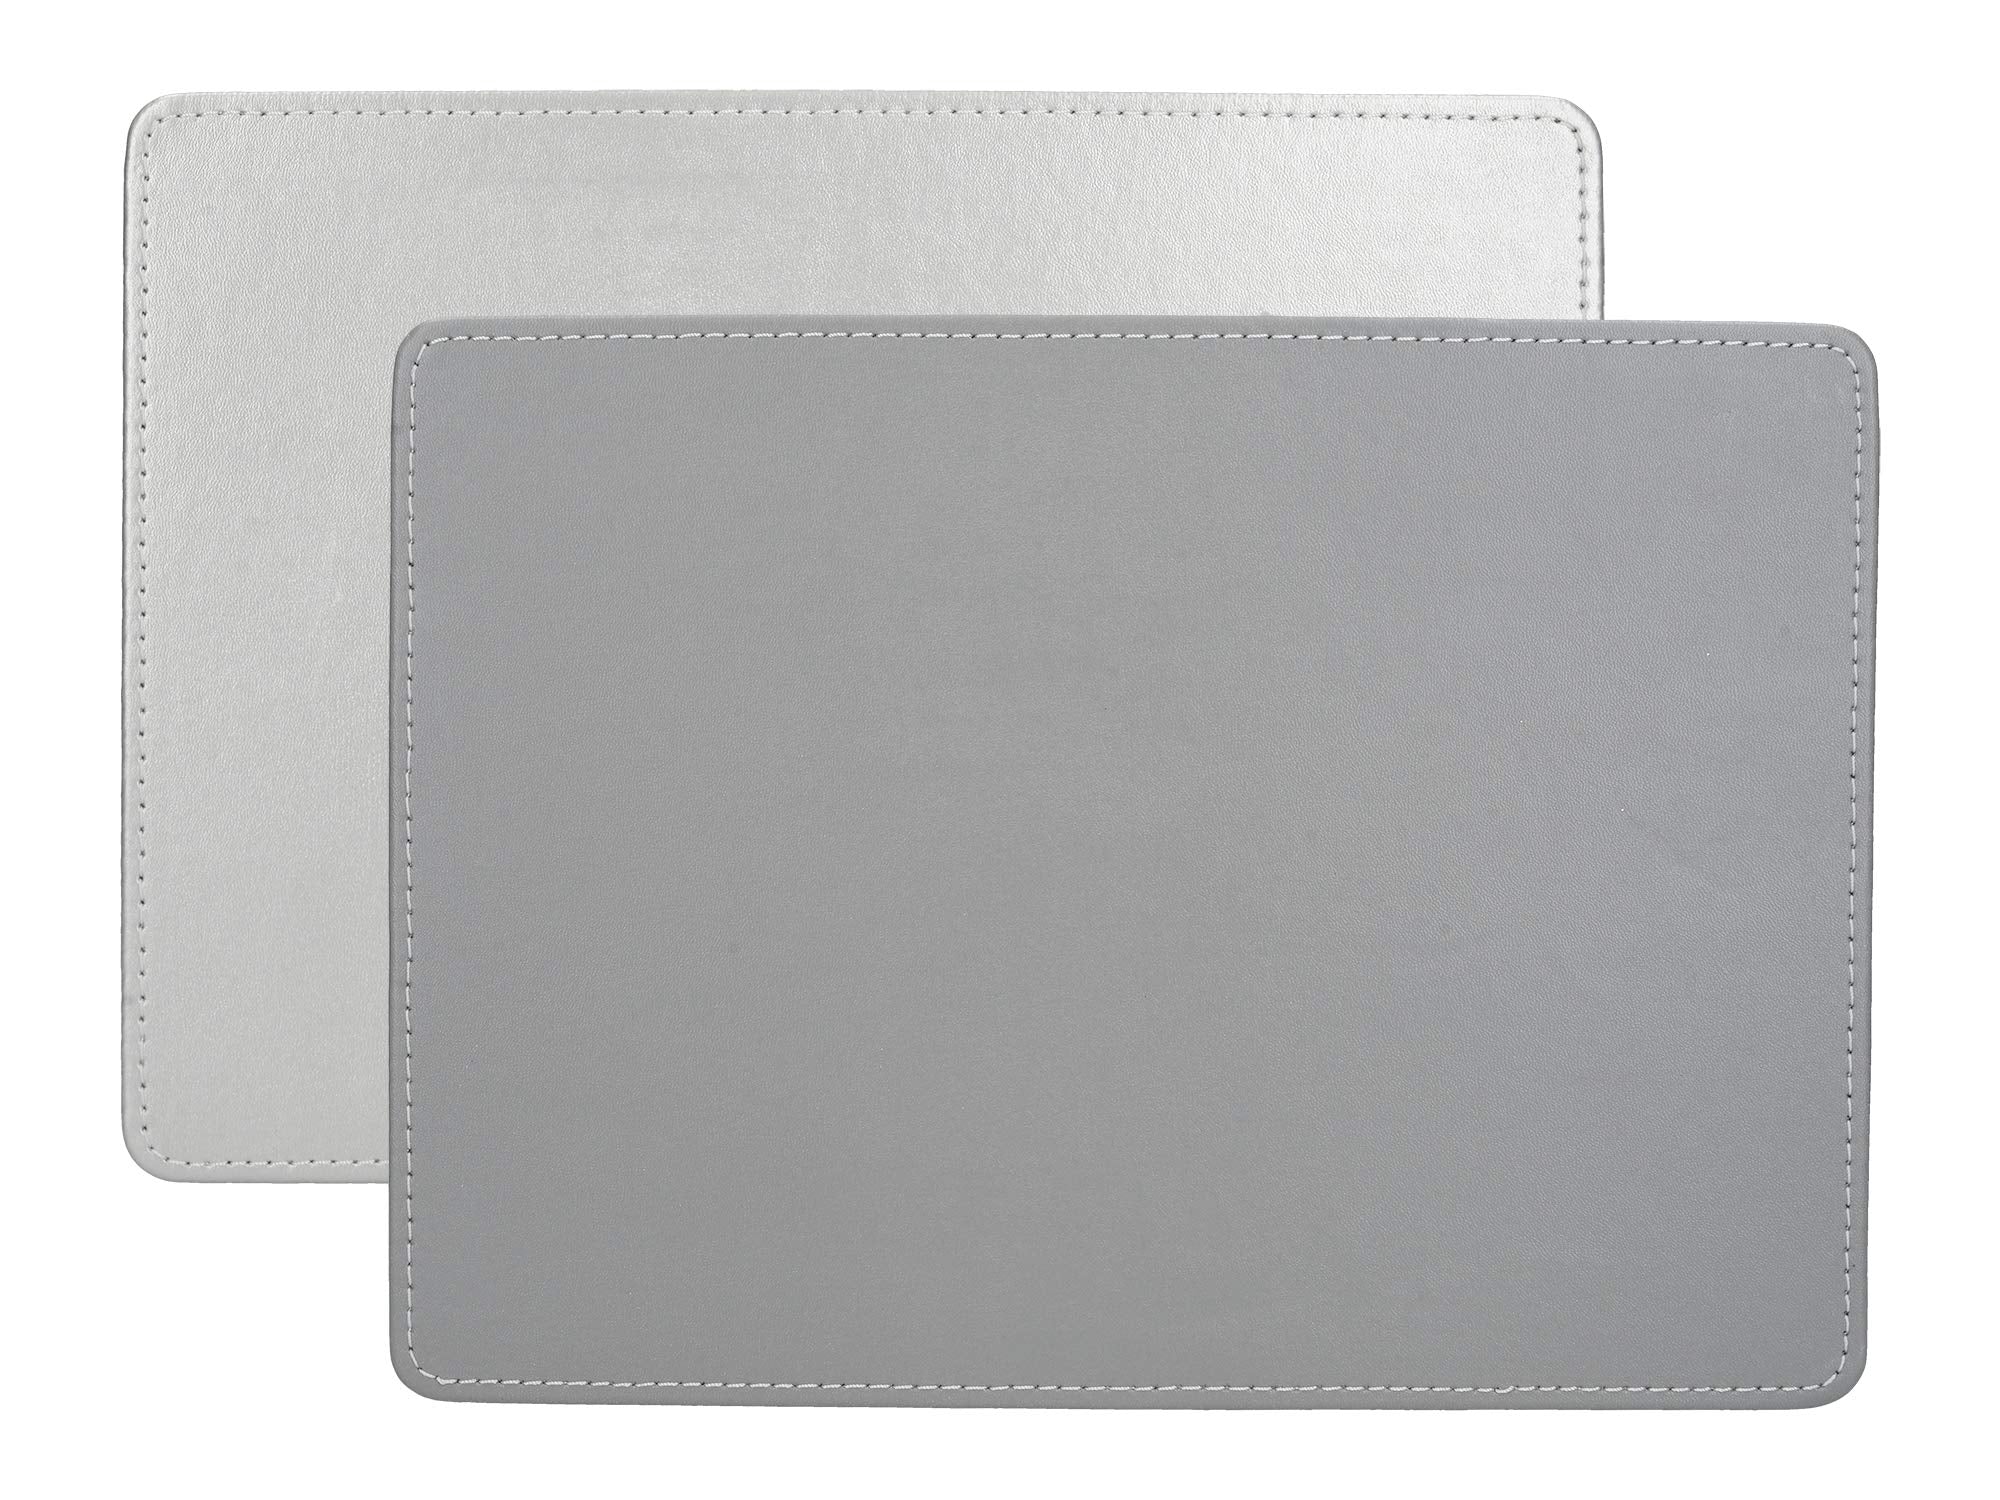 Creative Tops C000268 Silver Placemats, Rectangular, 29 x 21.5 cm, Set of 4 Faux Leather Table Mats